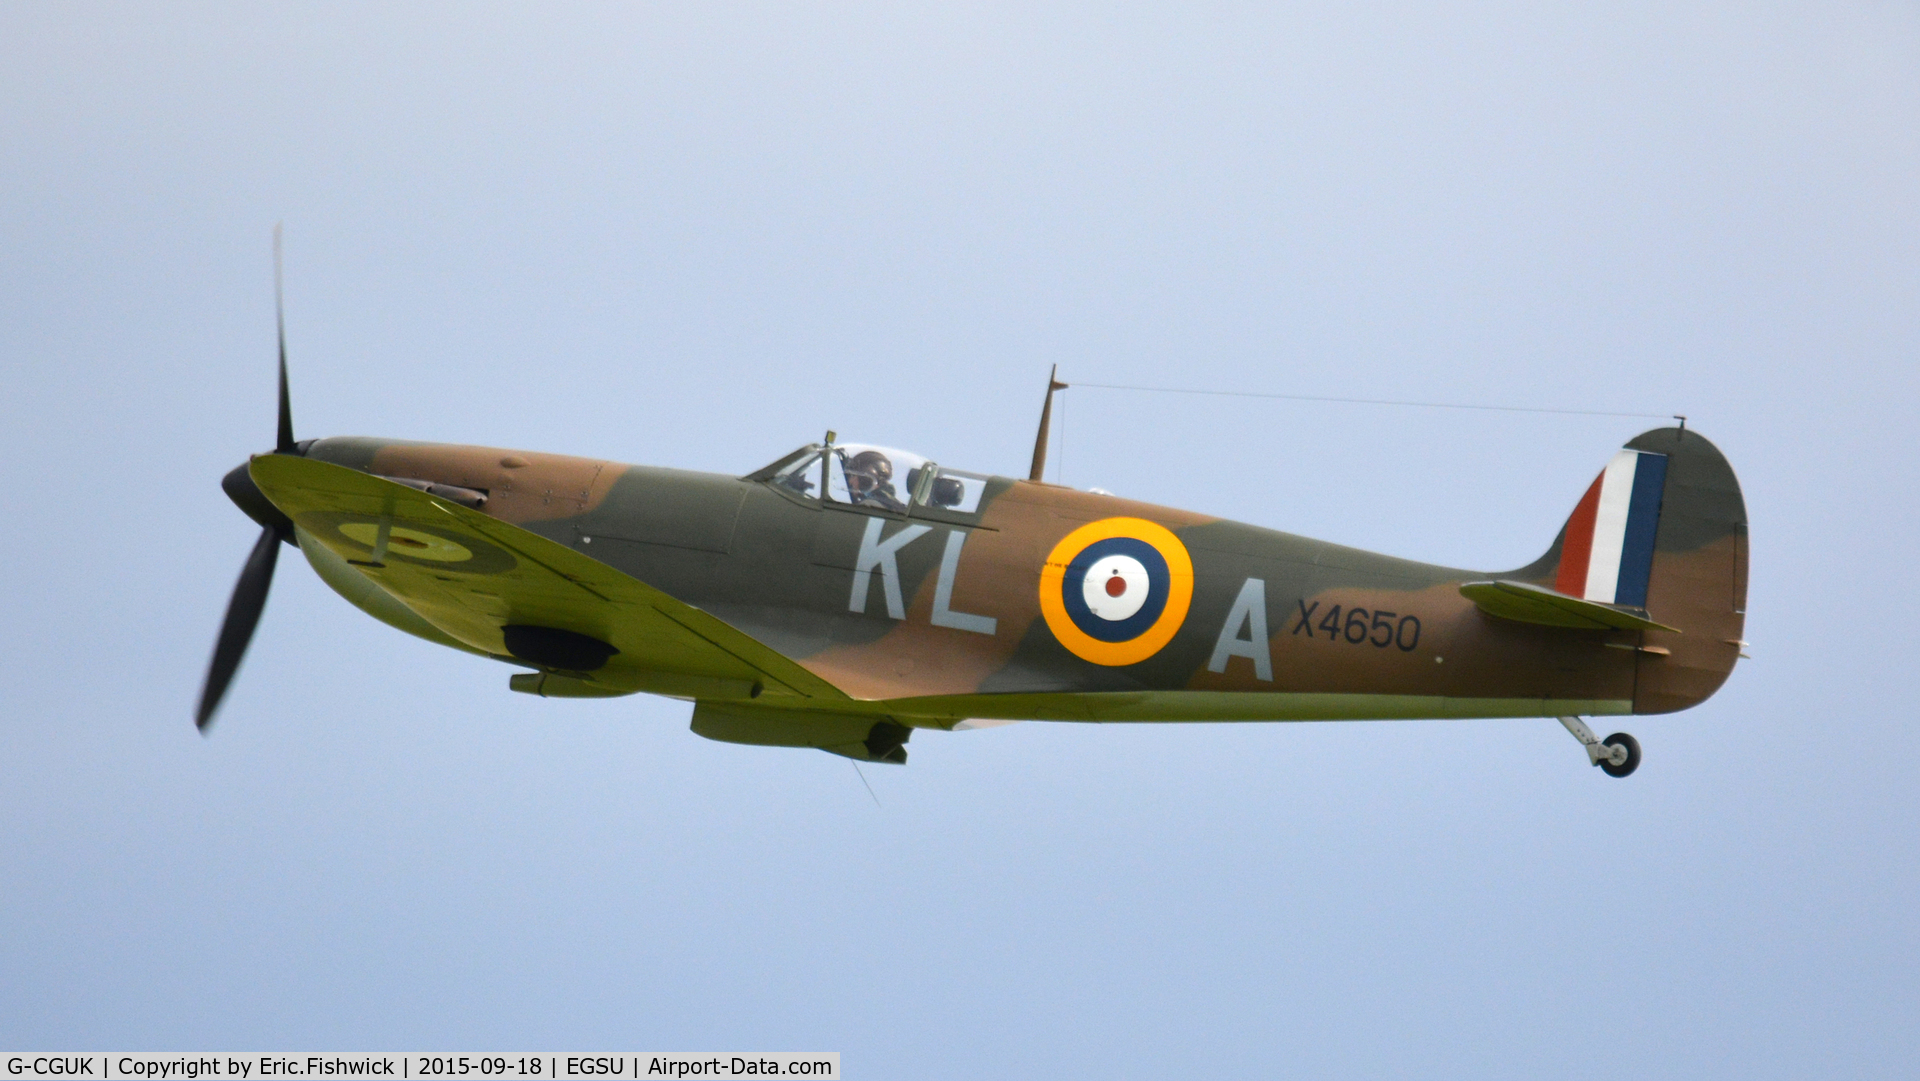 G-CGUK, 1940 Supermarine 300 Spitfire Mk1A C/N 6S-75531, 41. X4650 on the eve of The Battle of Britain (75th.) Anniversary Air Show, Sept. 2015.